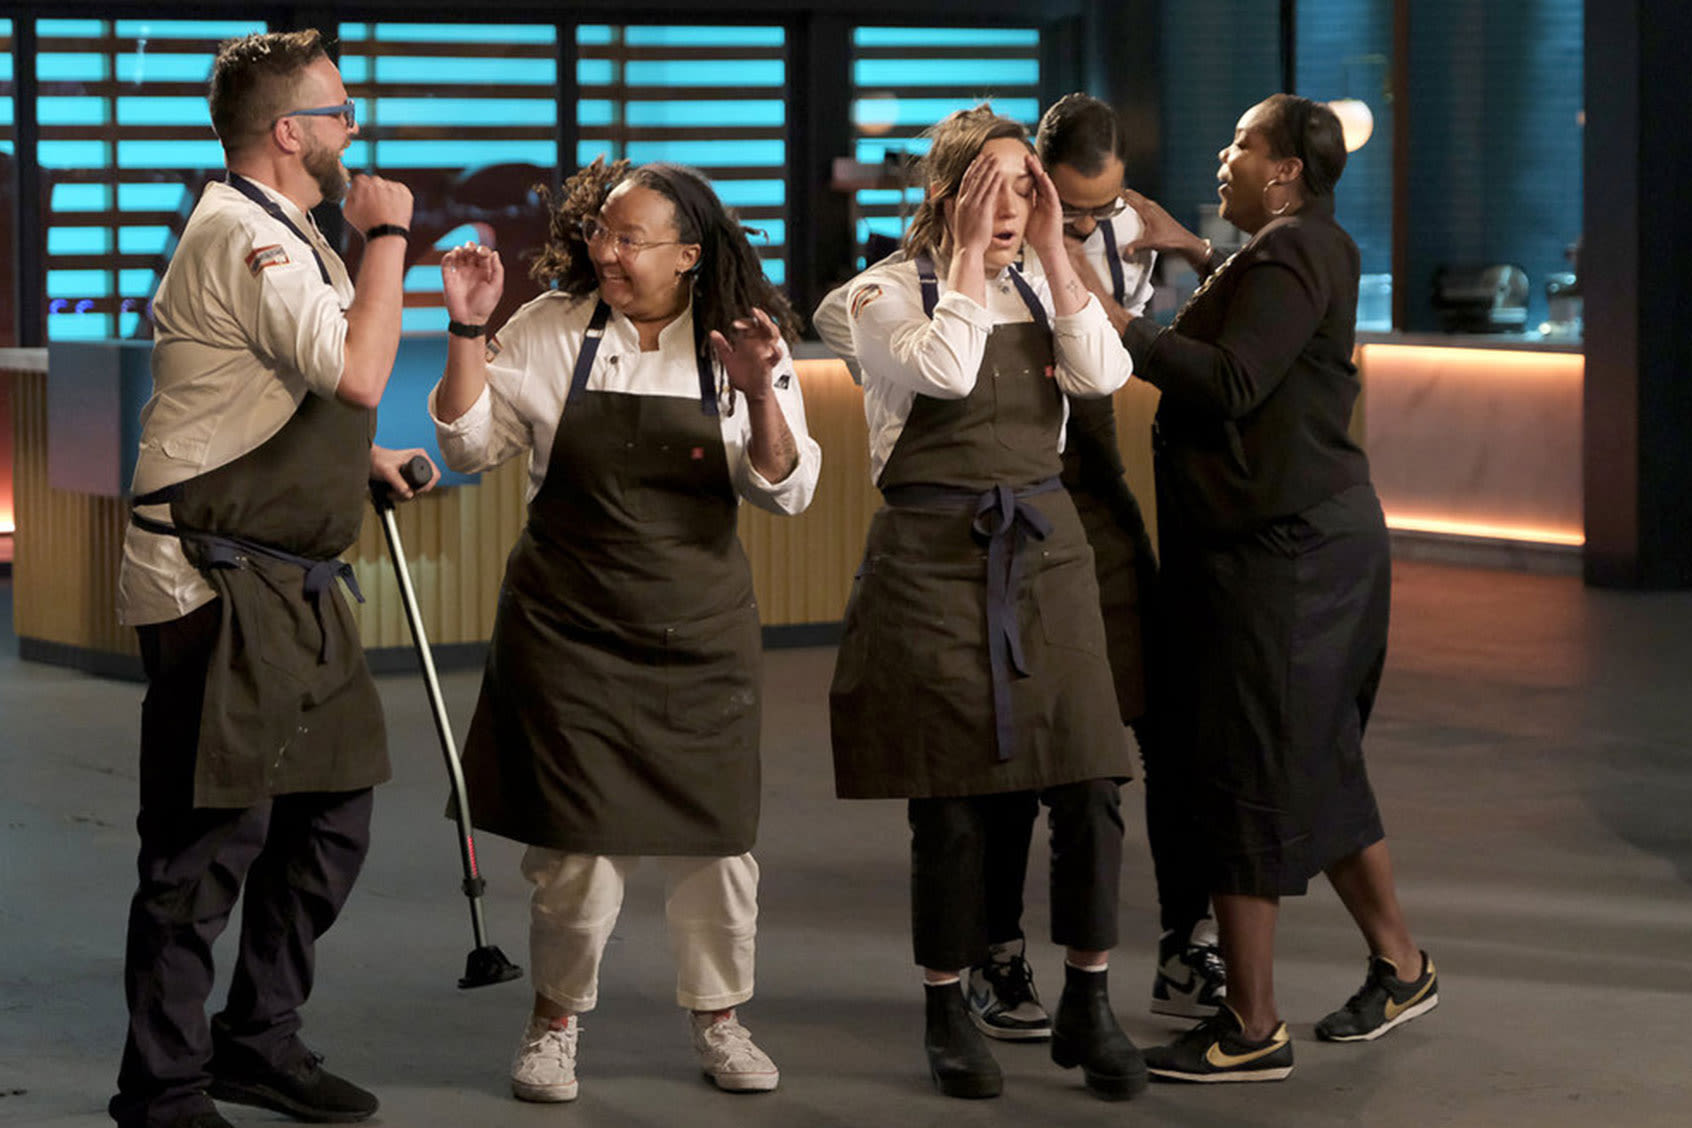 "Top Chef's" latest "Restaurant Wars" doesn't reach the highs of previous seasons